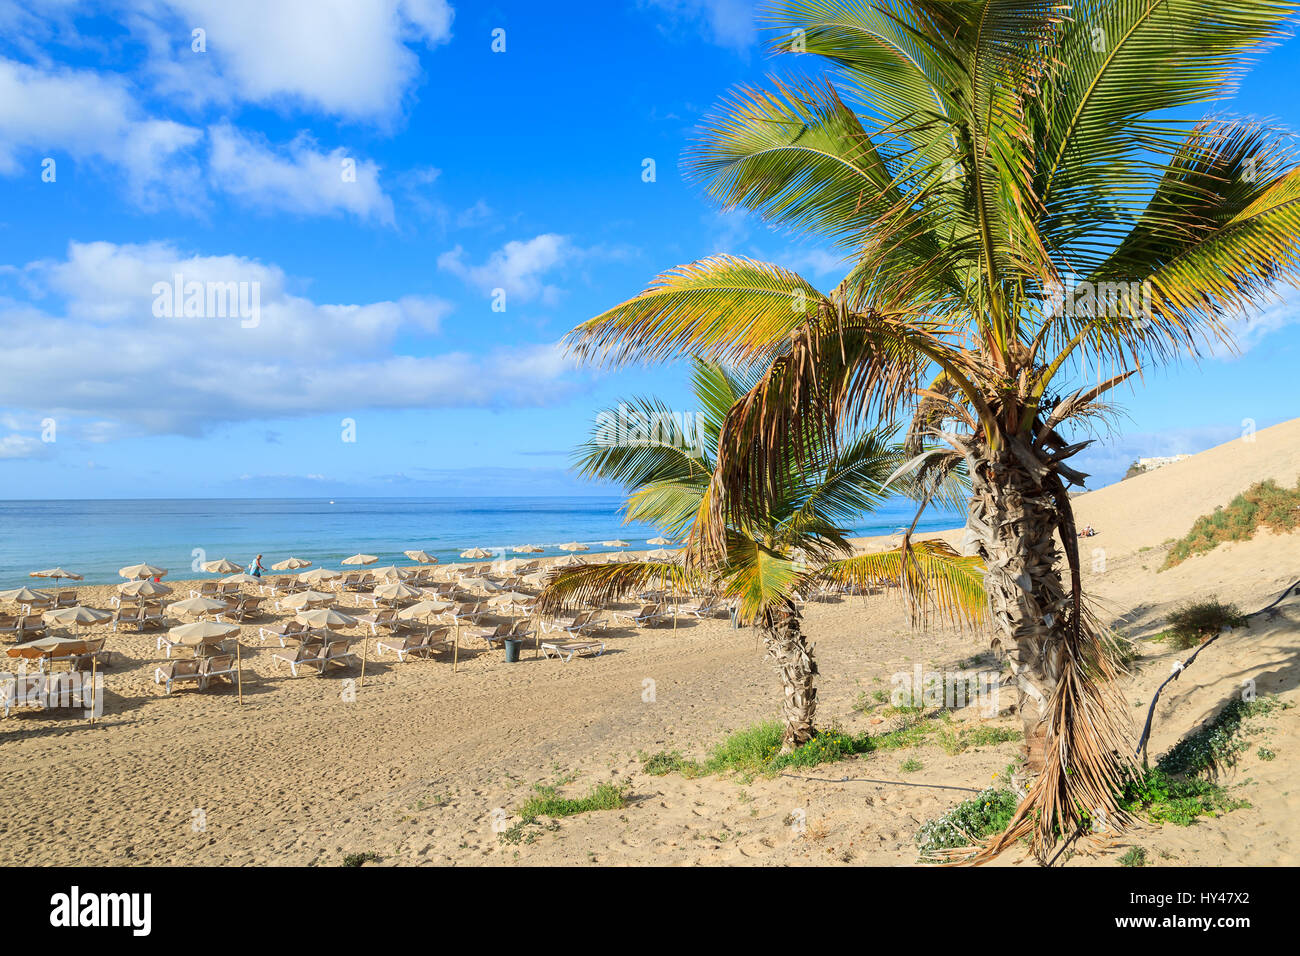 Palm trees on sandy beach in Morro Jable town, Fuerteventura, Canary Islands, Spain Stock Photo